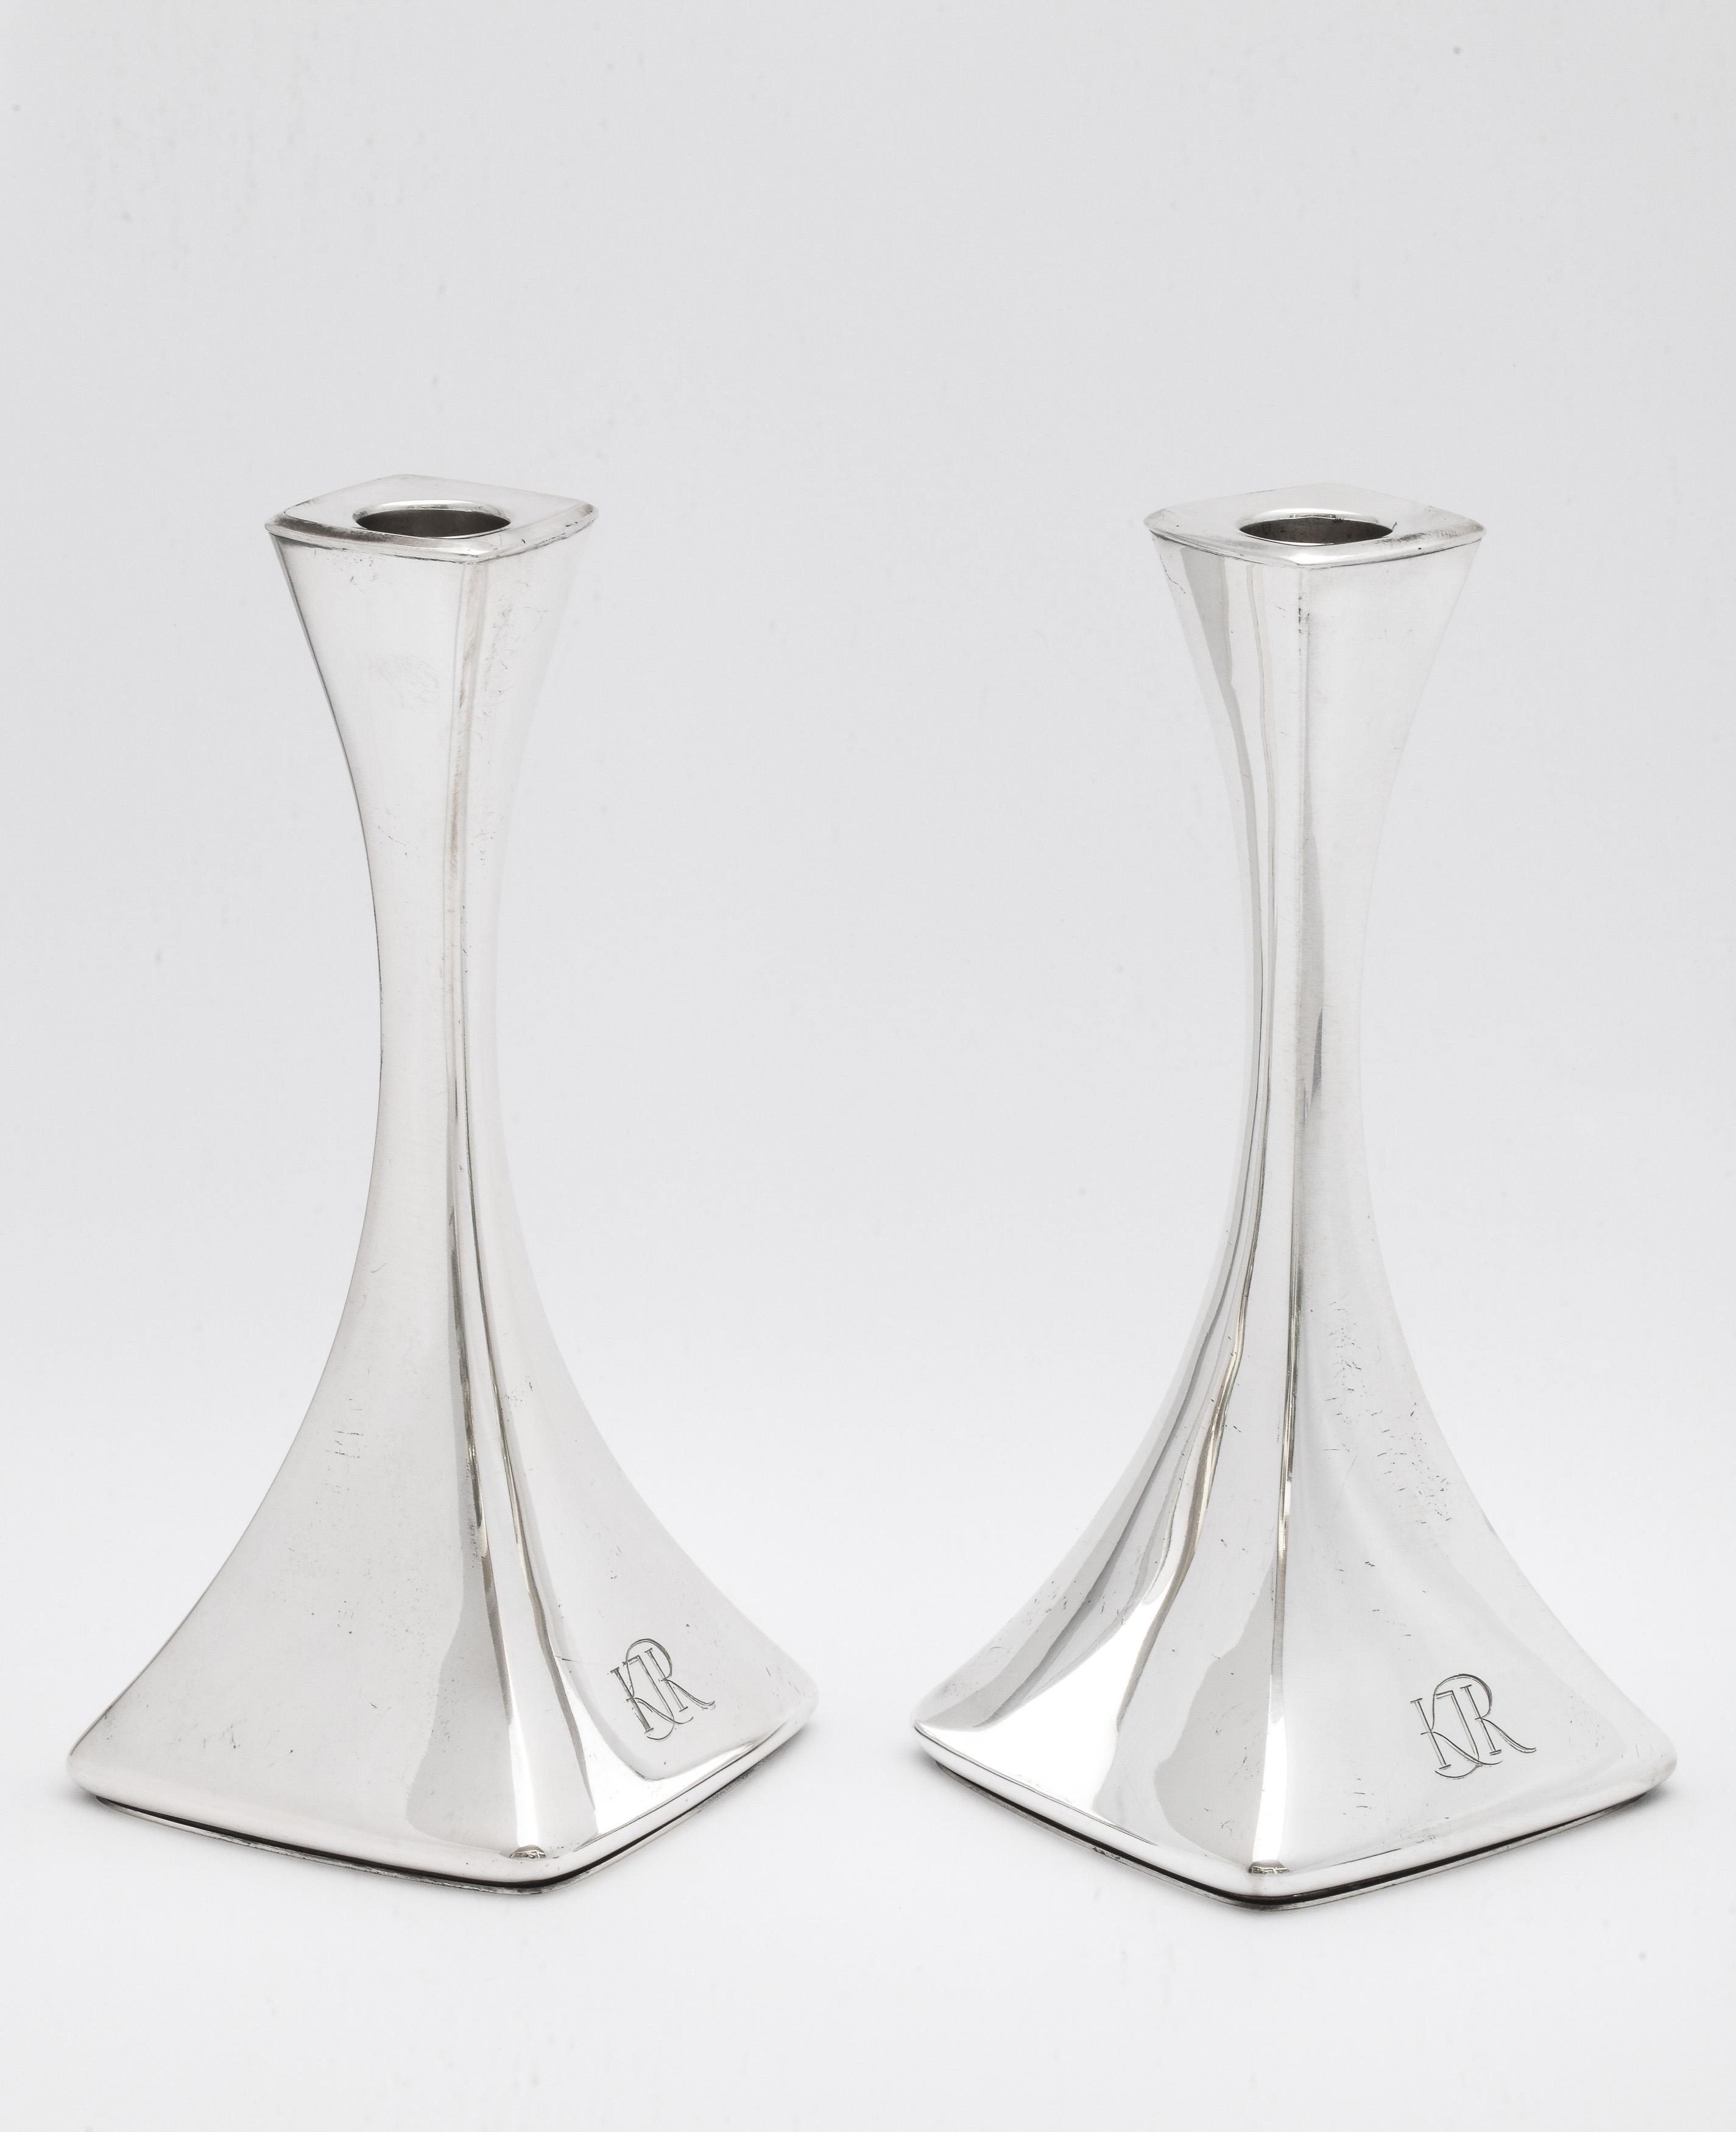 Pair of Mid-Century Modern Continental Silver Finland Candlesticks by Turku In Good Condition For Sale In New York, NY